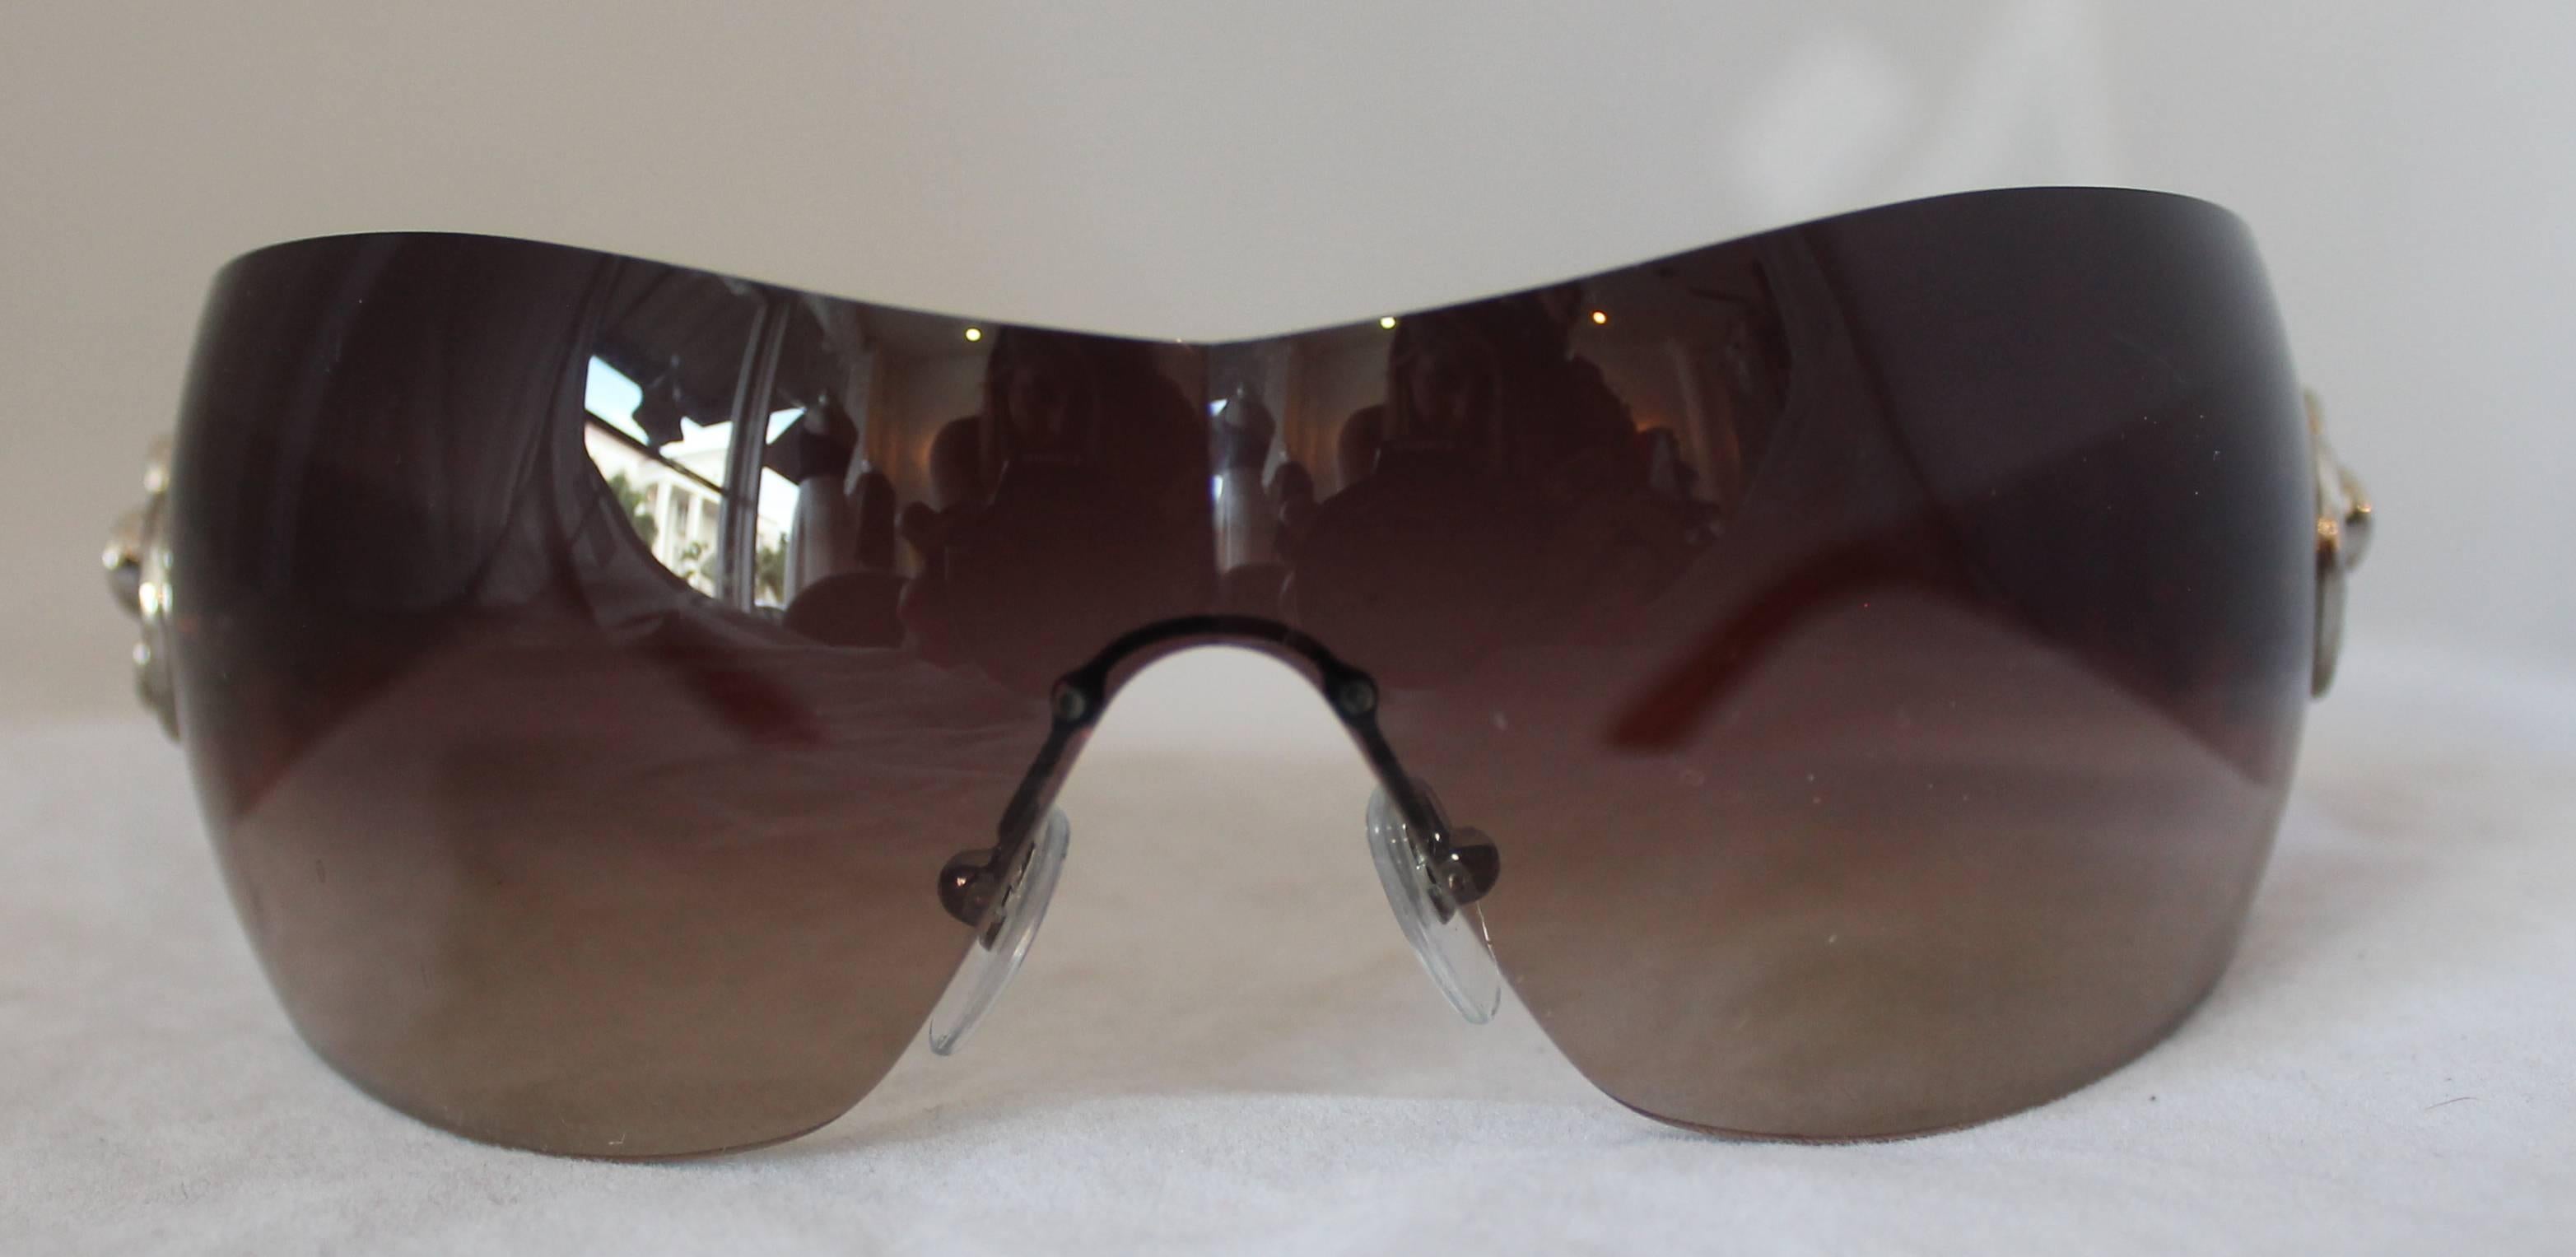 Bulgari Light Brown Sunglasses w/ Crystal Flower and Rhinestone Detail.  These sunglasses are in good condition with minor wear to the lenses.  They have graduated lenses, fading from darker to lighter from top to bottom.  They are embellished with